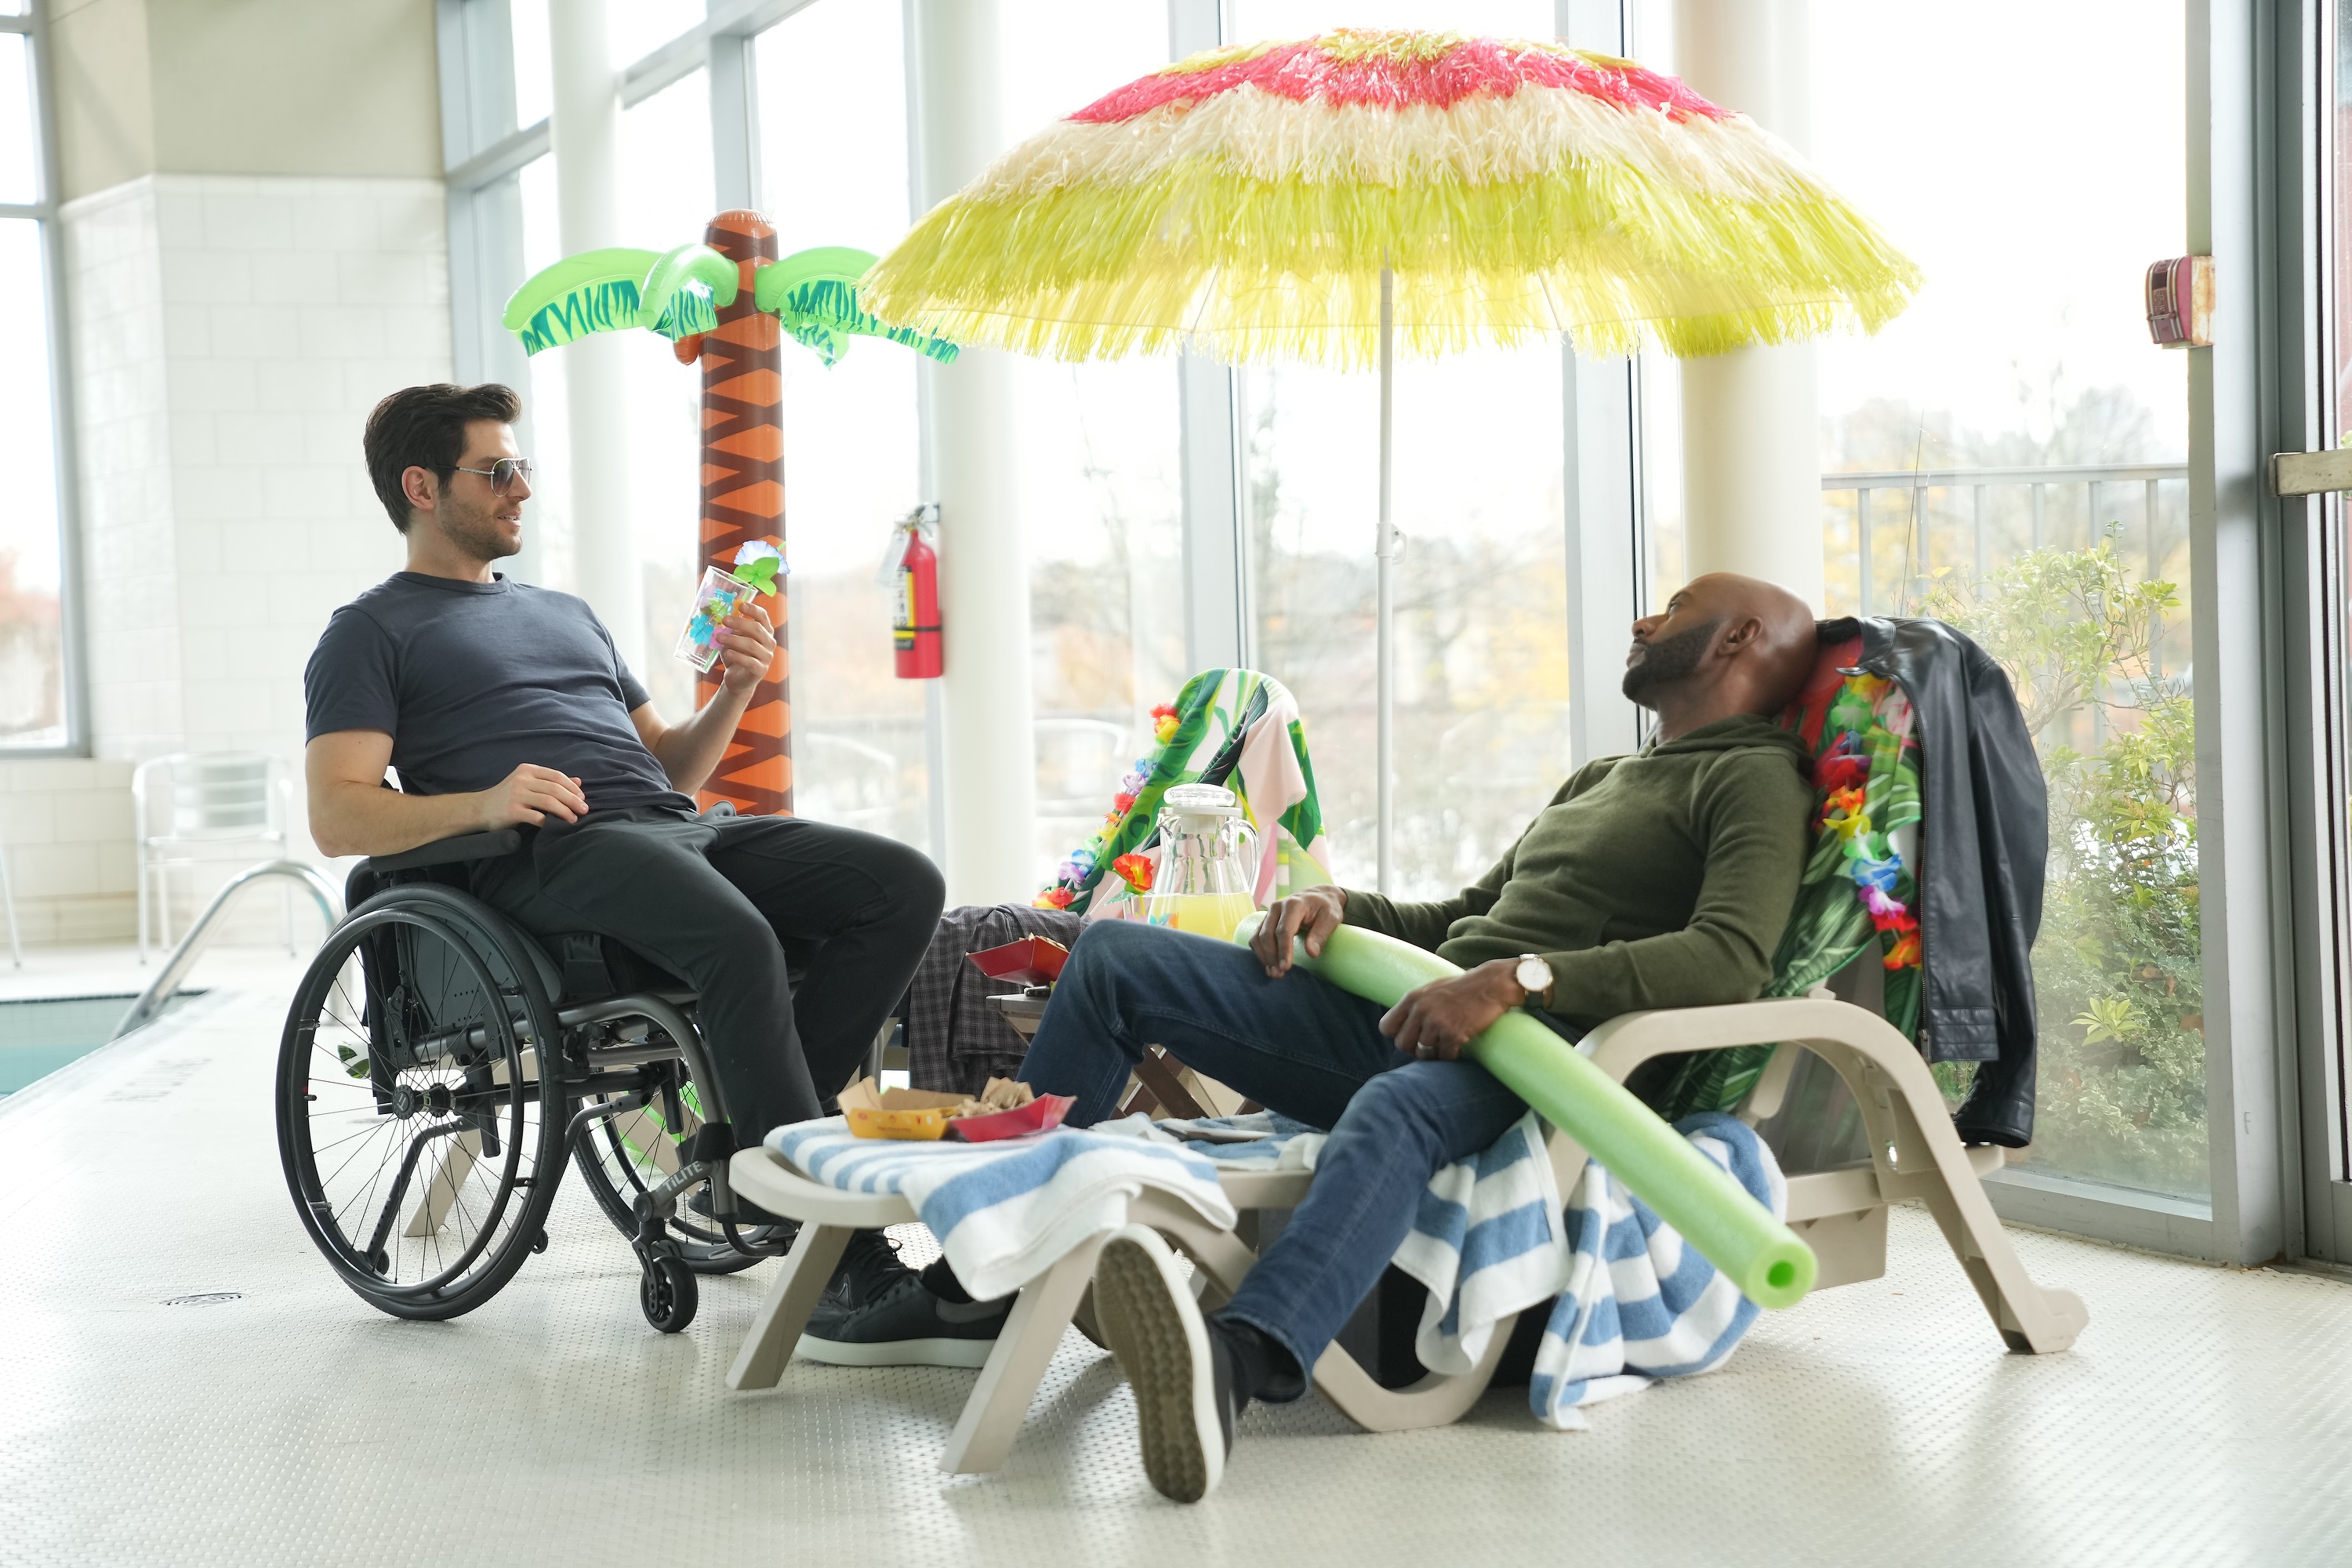 'A Million Little Things' cast members David Giuntoli and Romany Malco lounge in an indoor pool area when the show returns